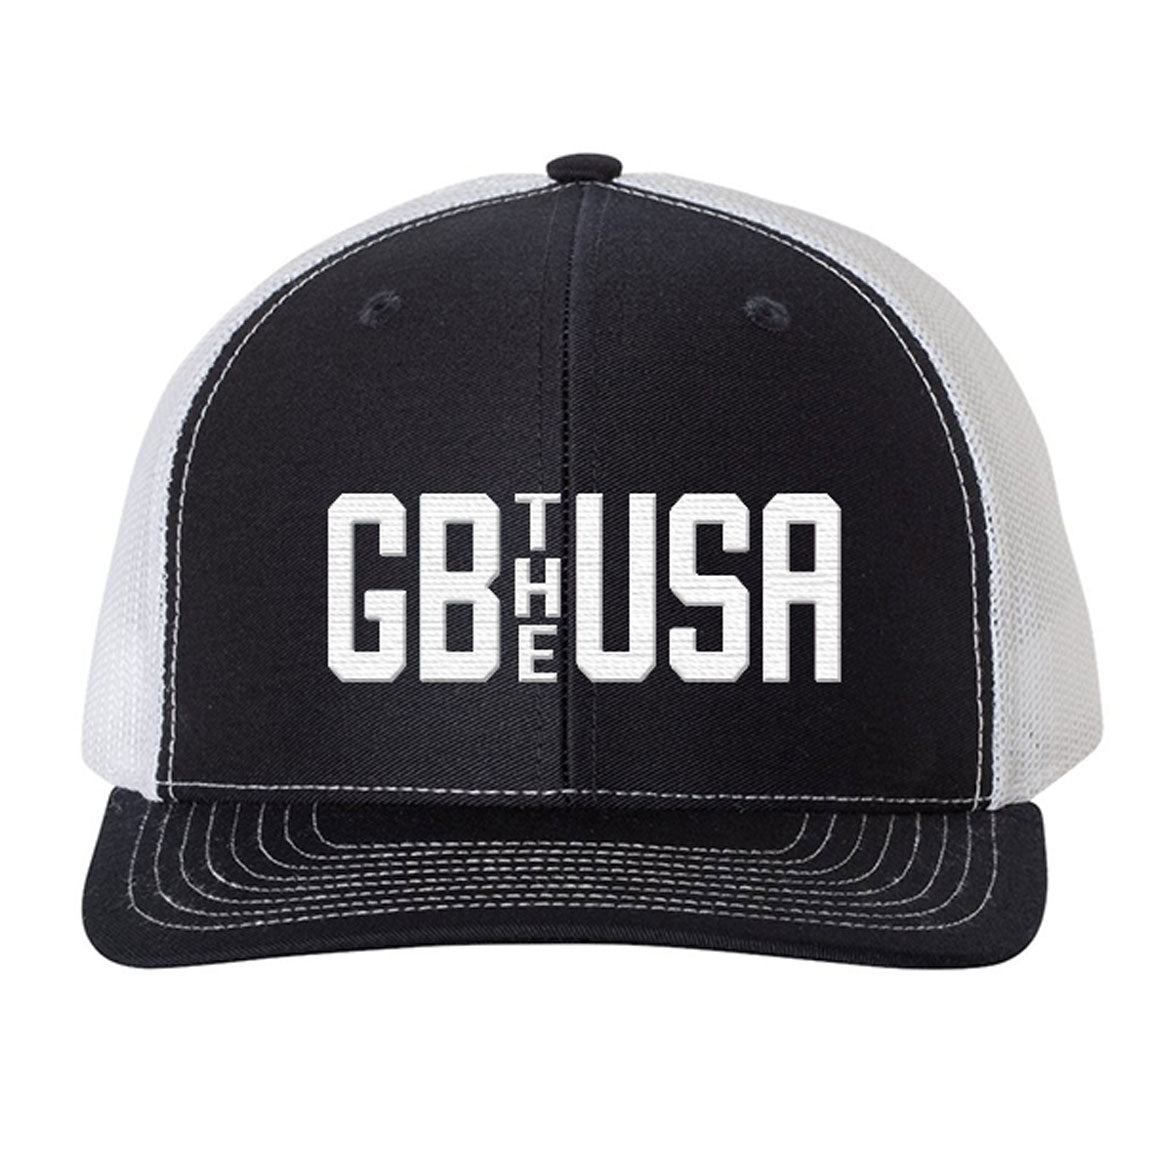 GB THE USA - Navy and White Hat